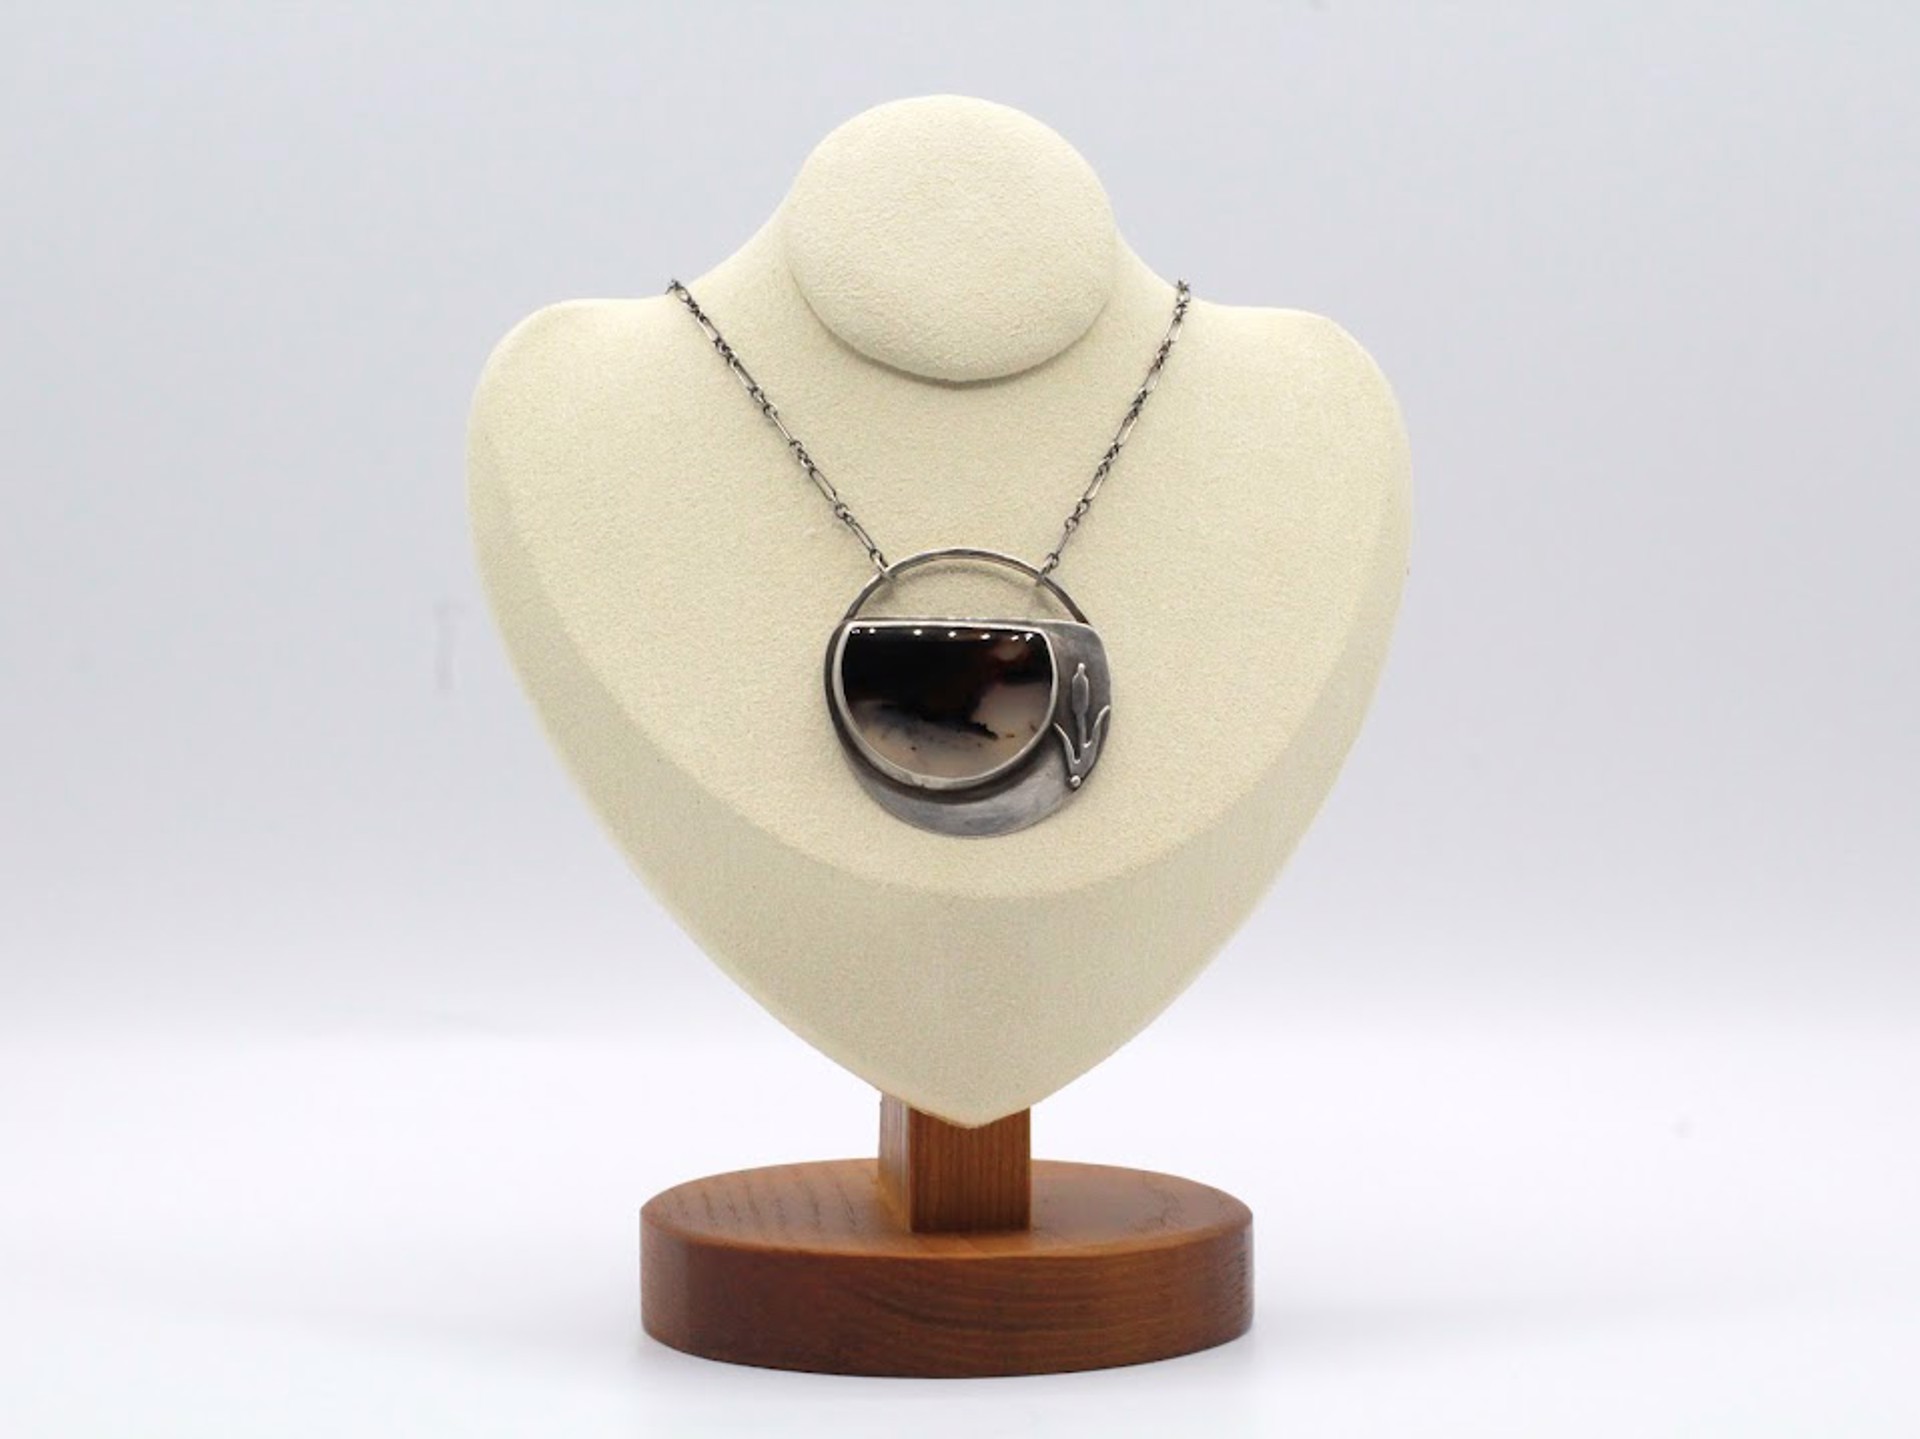 Montana Agate with Hand-sawn Cattails Necklace by Ashley Hanna